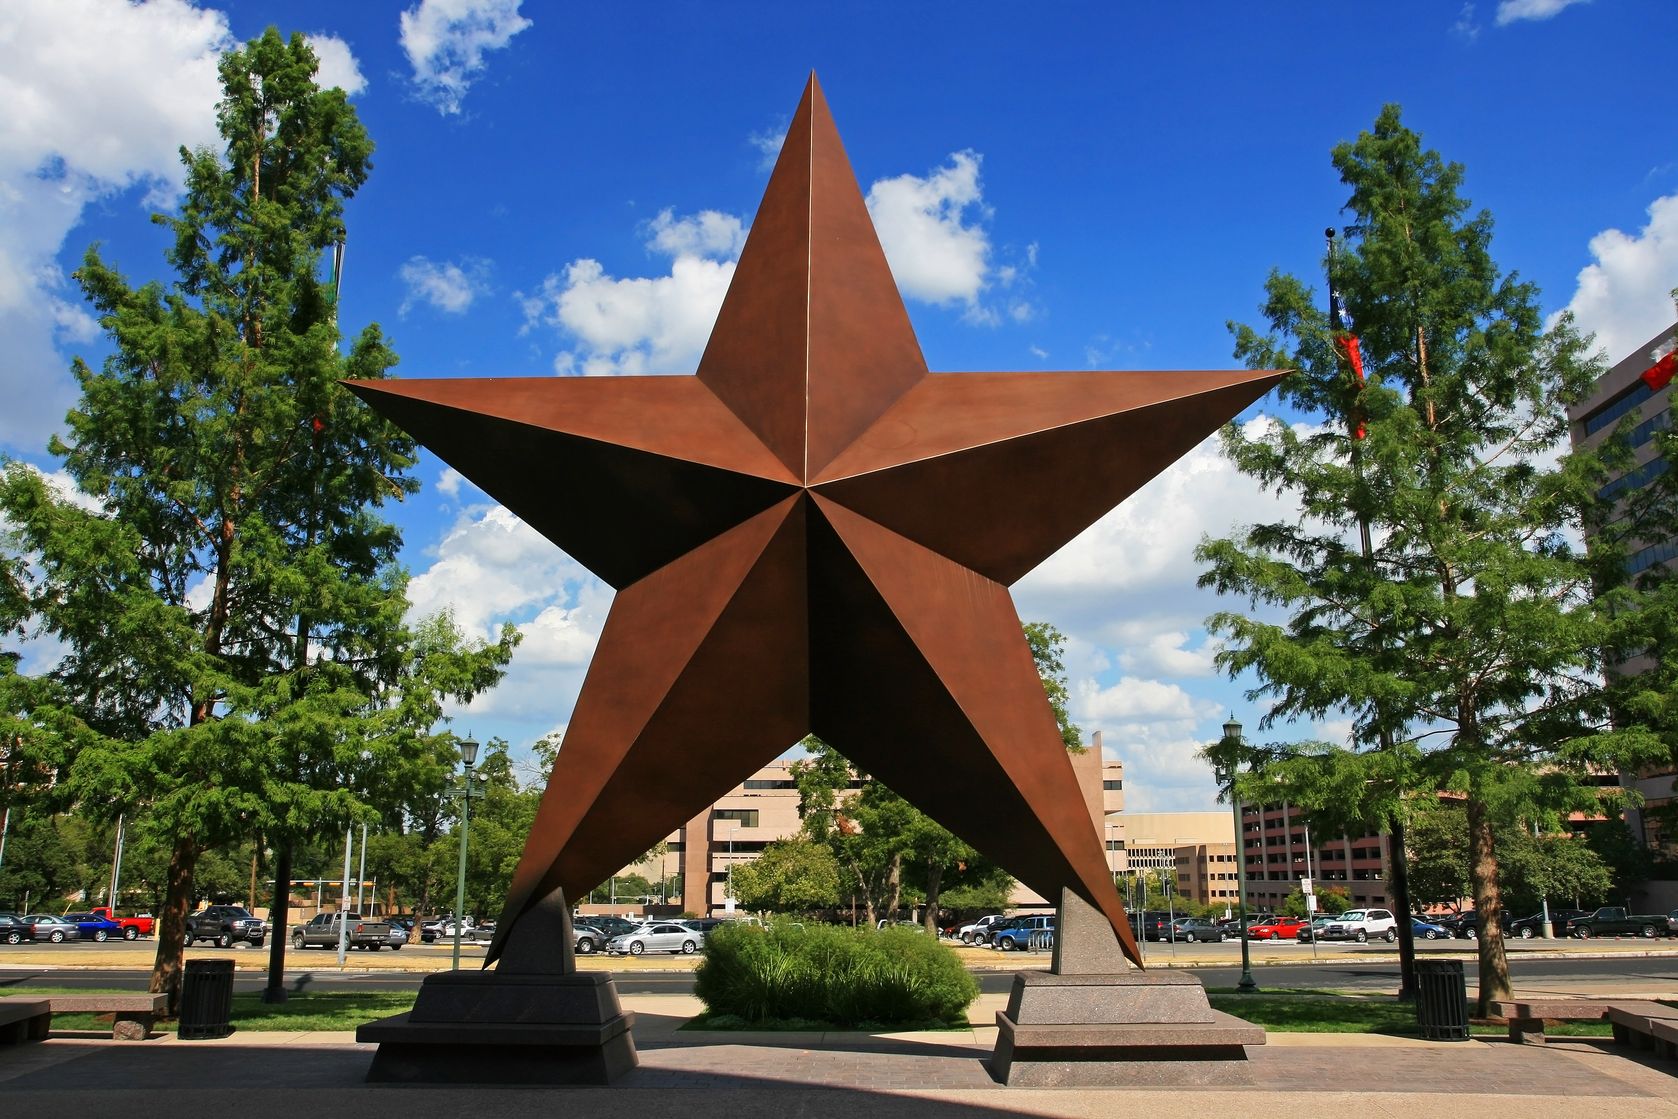 Texas Facts & FAQs: Why Texas is known as the Lone Star State